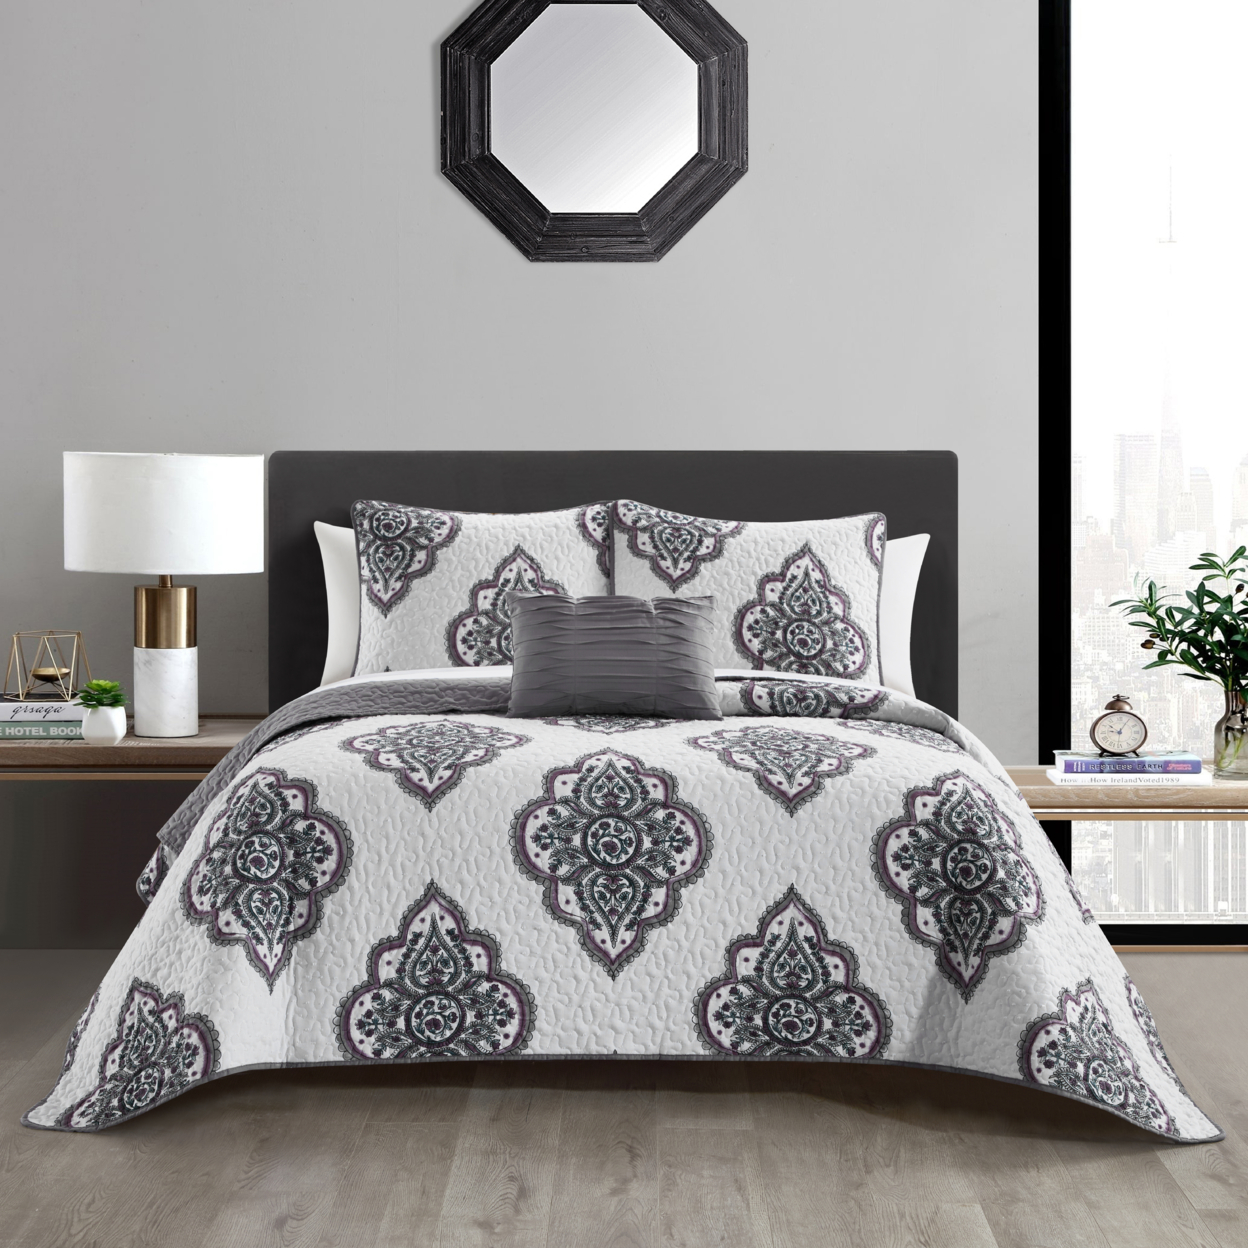 Ennett 4 Or 8 Piece Cotton Jacquard Quilt Set Medallion Embroidered Bedding - Grey With Sheet Set, King (10 Piece)